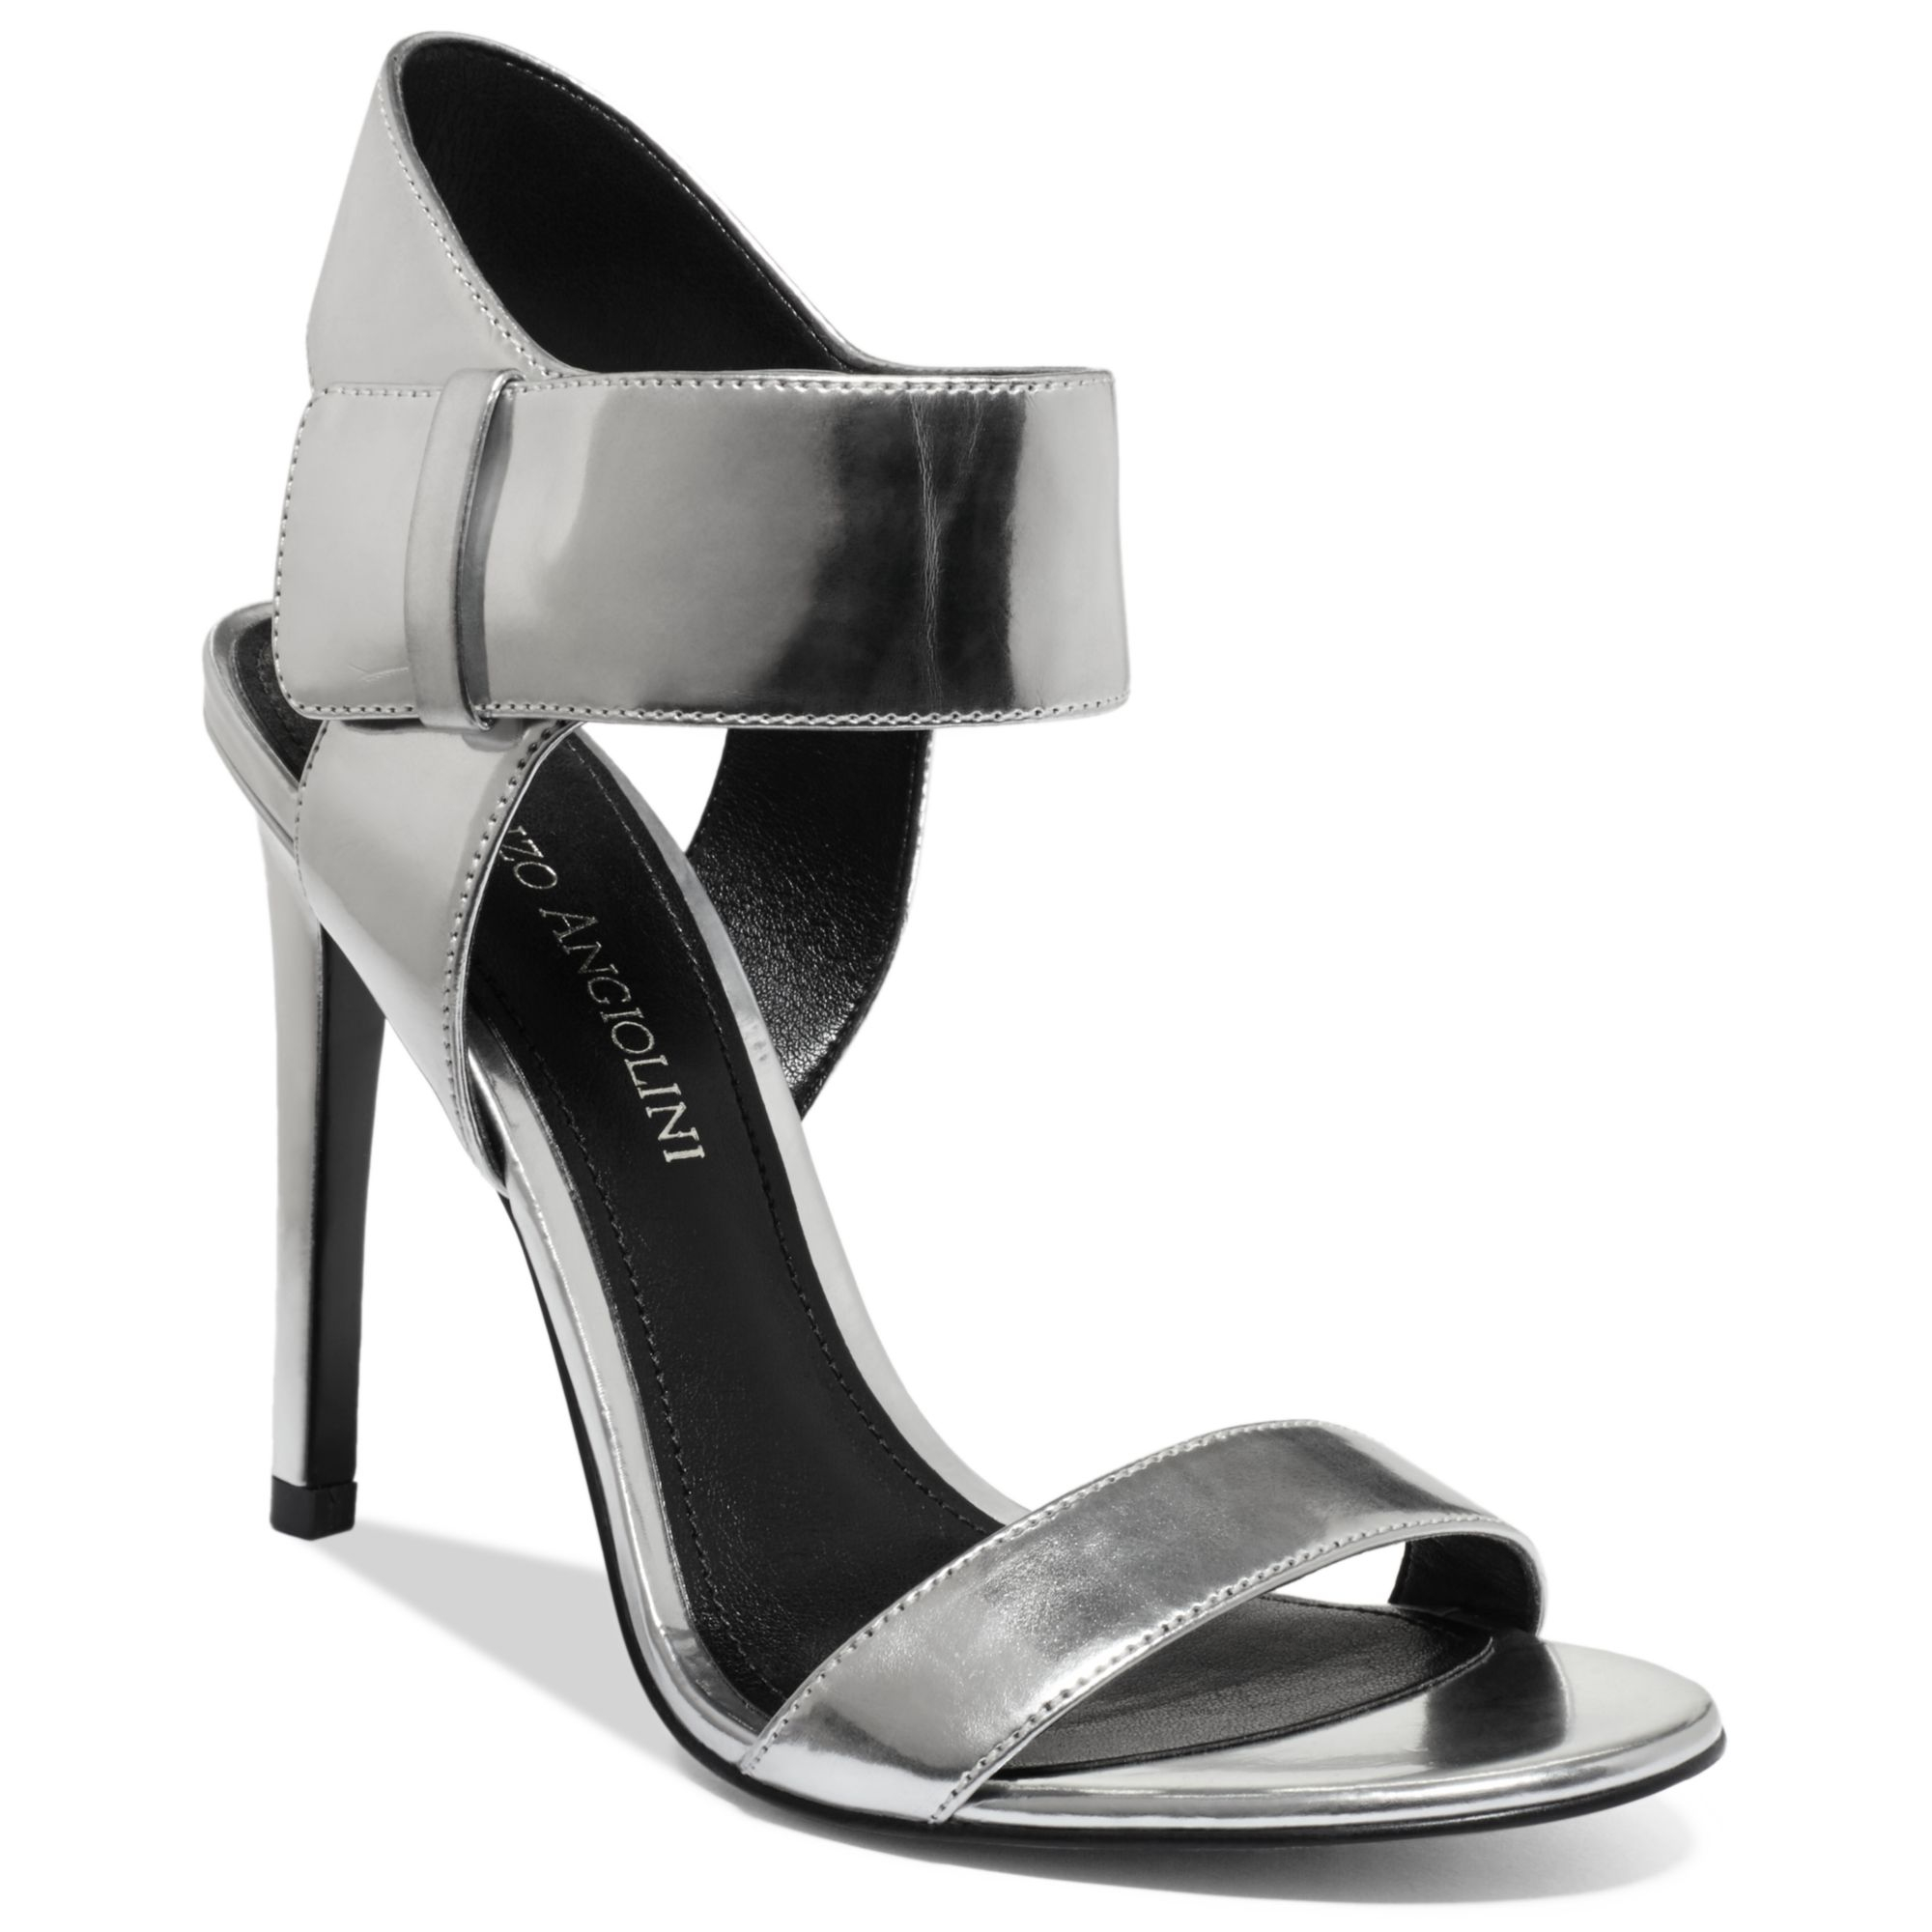 Lyst - Enzo angiolini Brodee Evening Sandals in Metallic